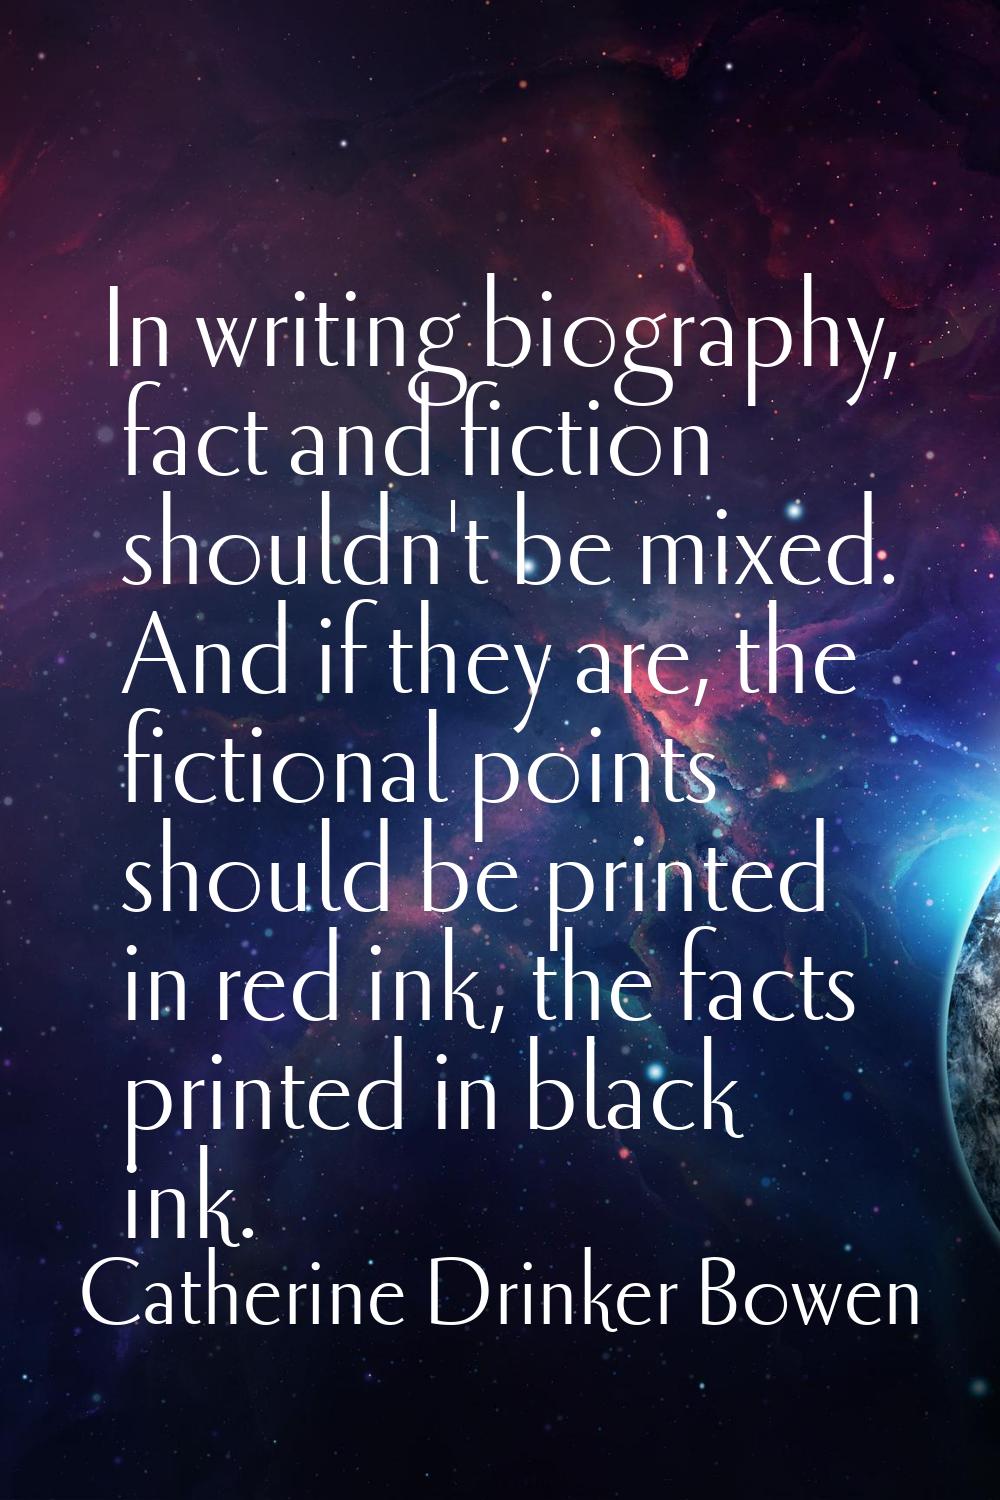 In writing biography, fact and fiction shouldn't be mixed. And if they are, the fictional points sh